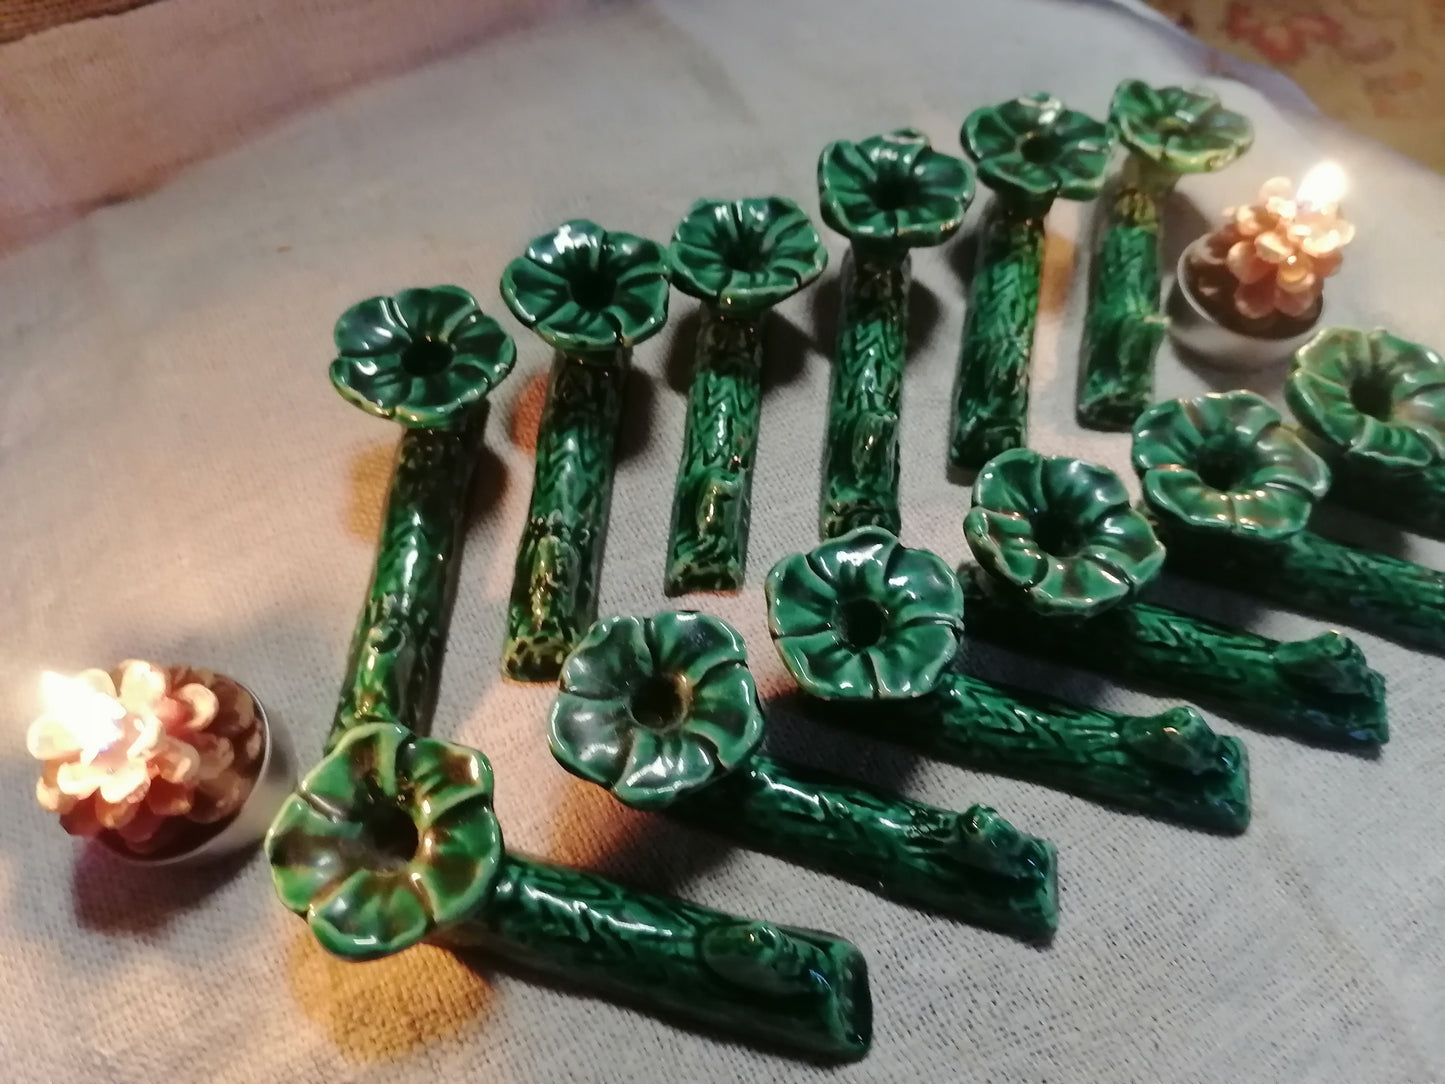 French green majolica knife rests (12)French green majolica knife rests (12)